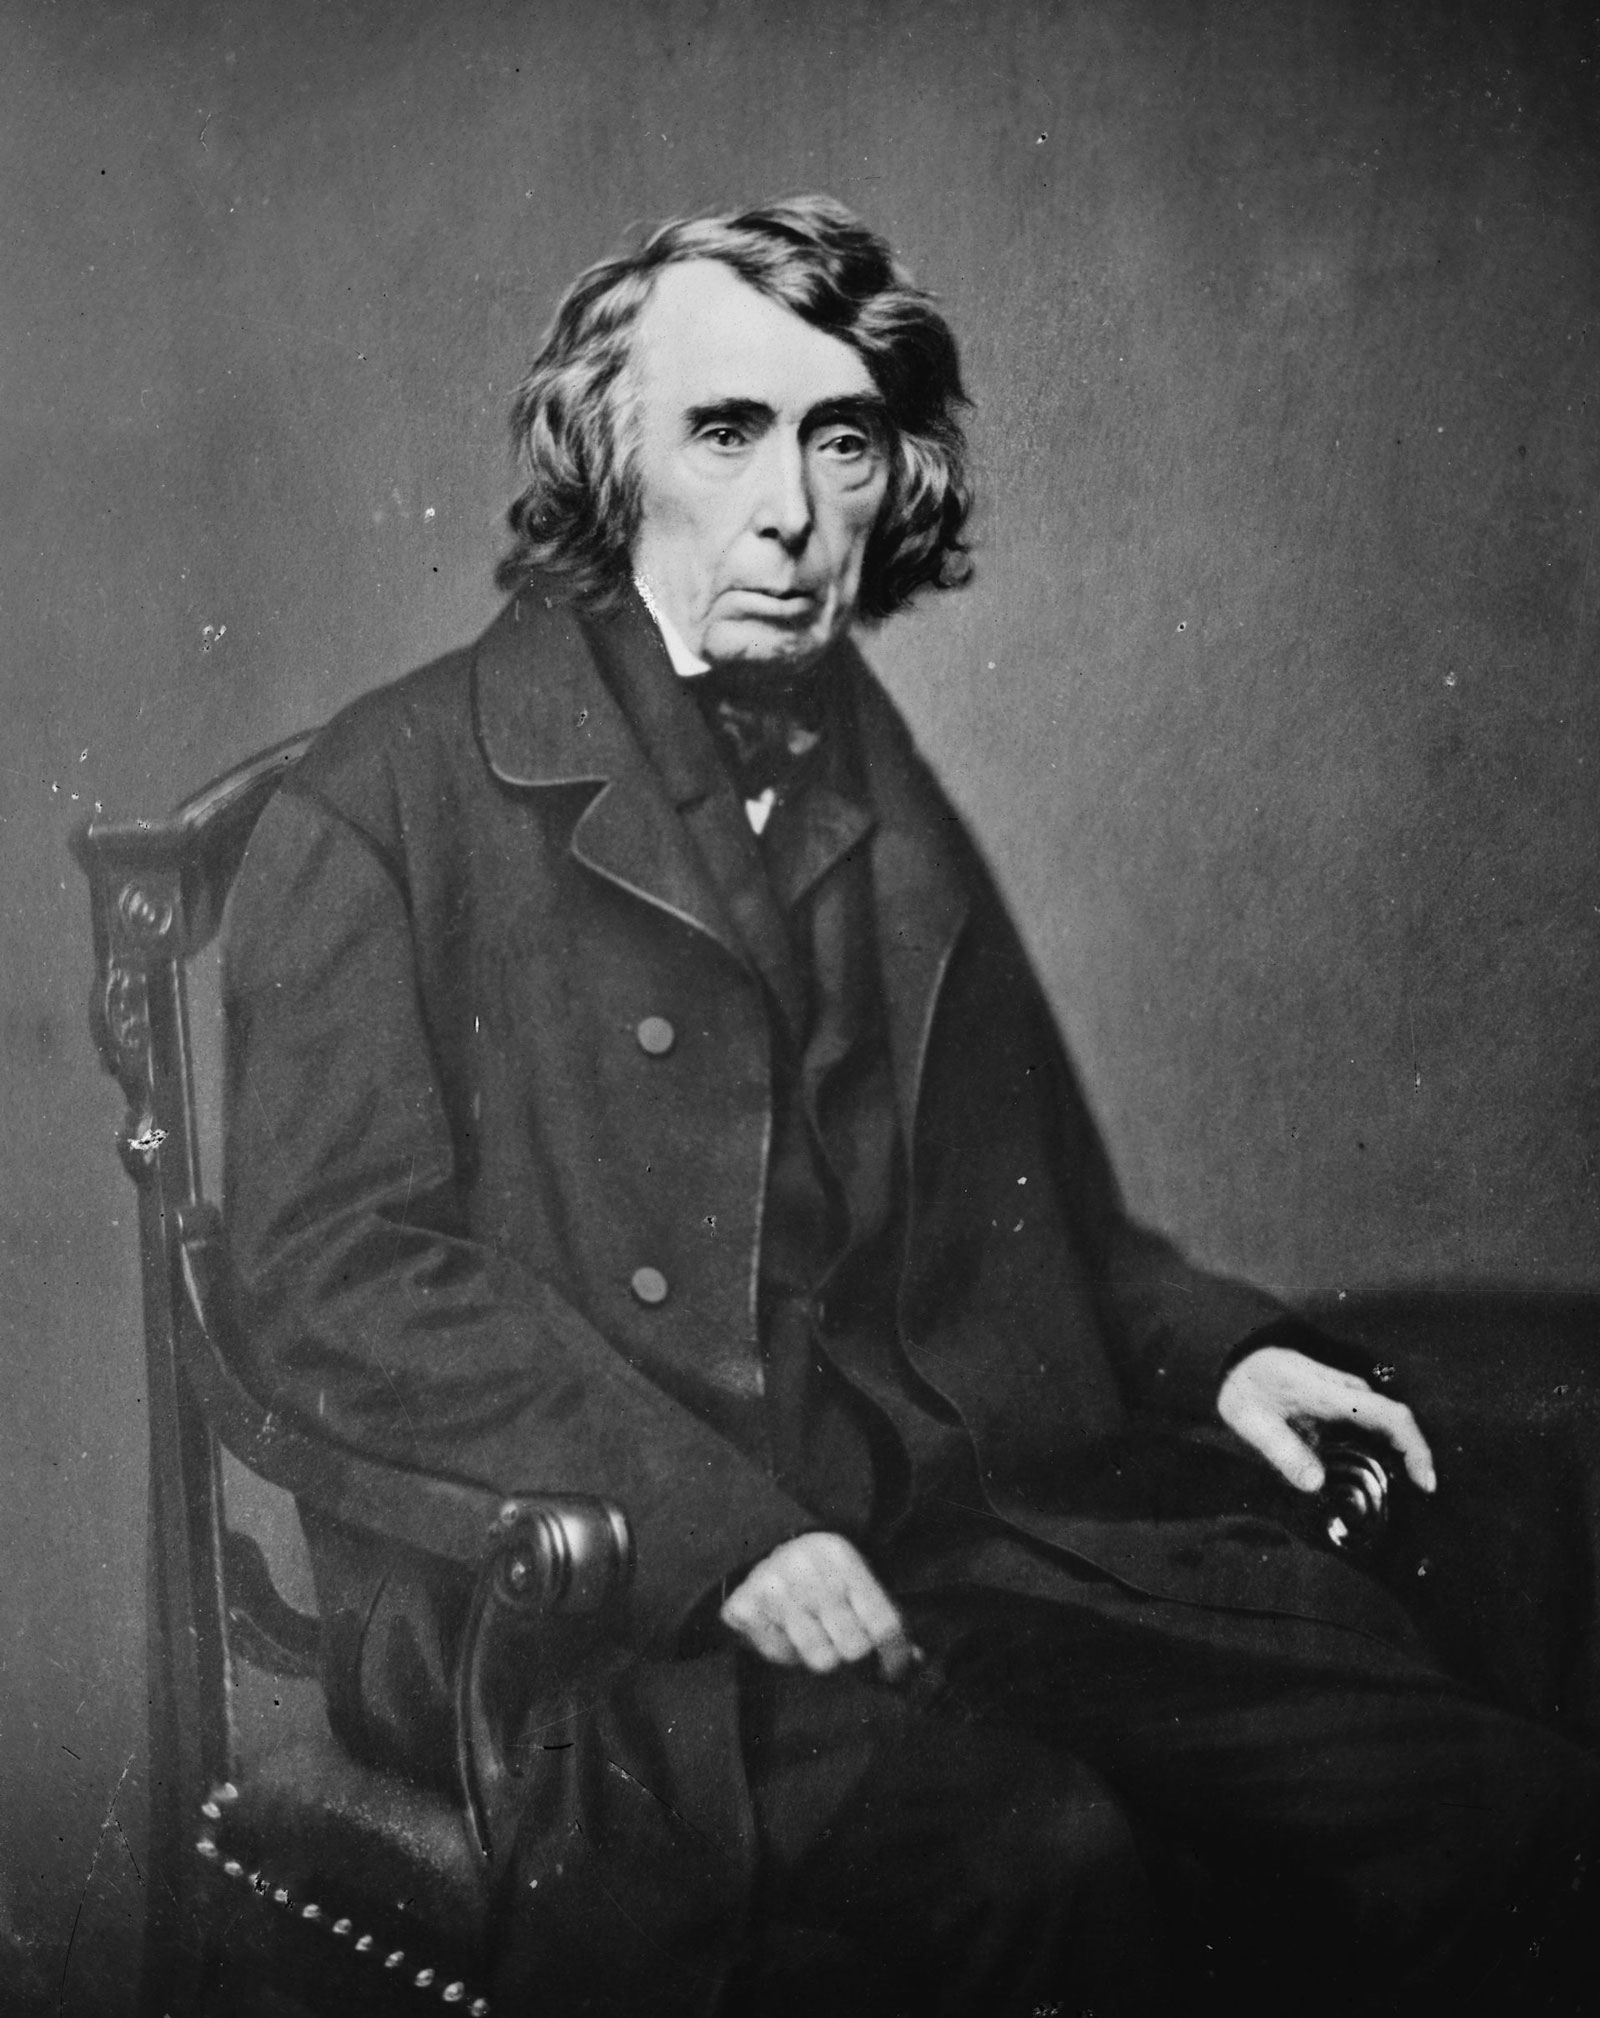 U.S. Supreme Court Chief Justice Roger Taney wrote the majority opinion in 1857 that ruled African Americans could not be considered U.S. citizens.